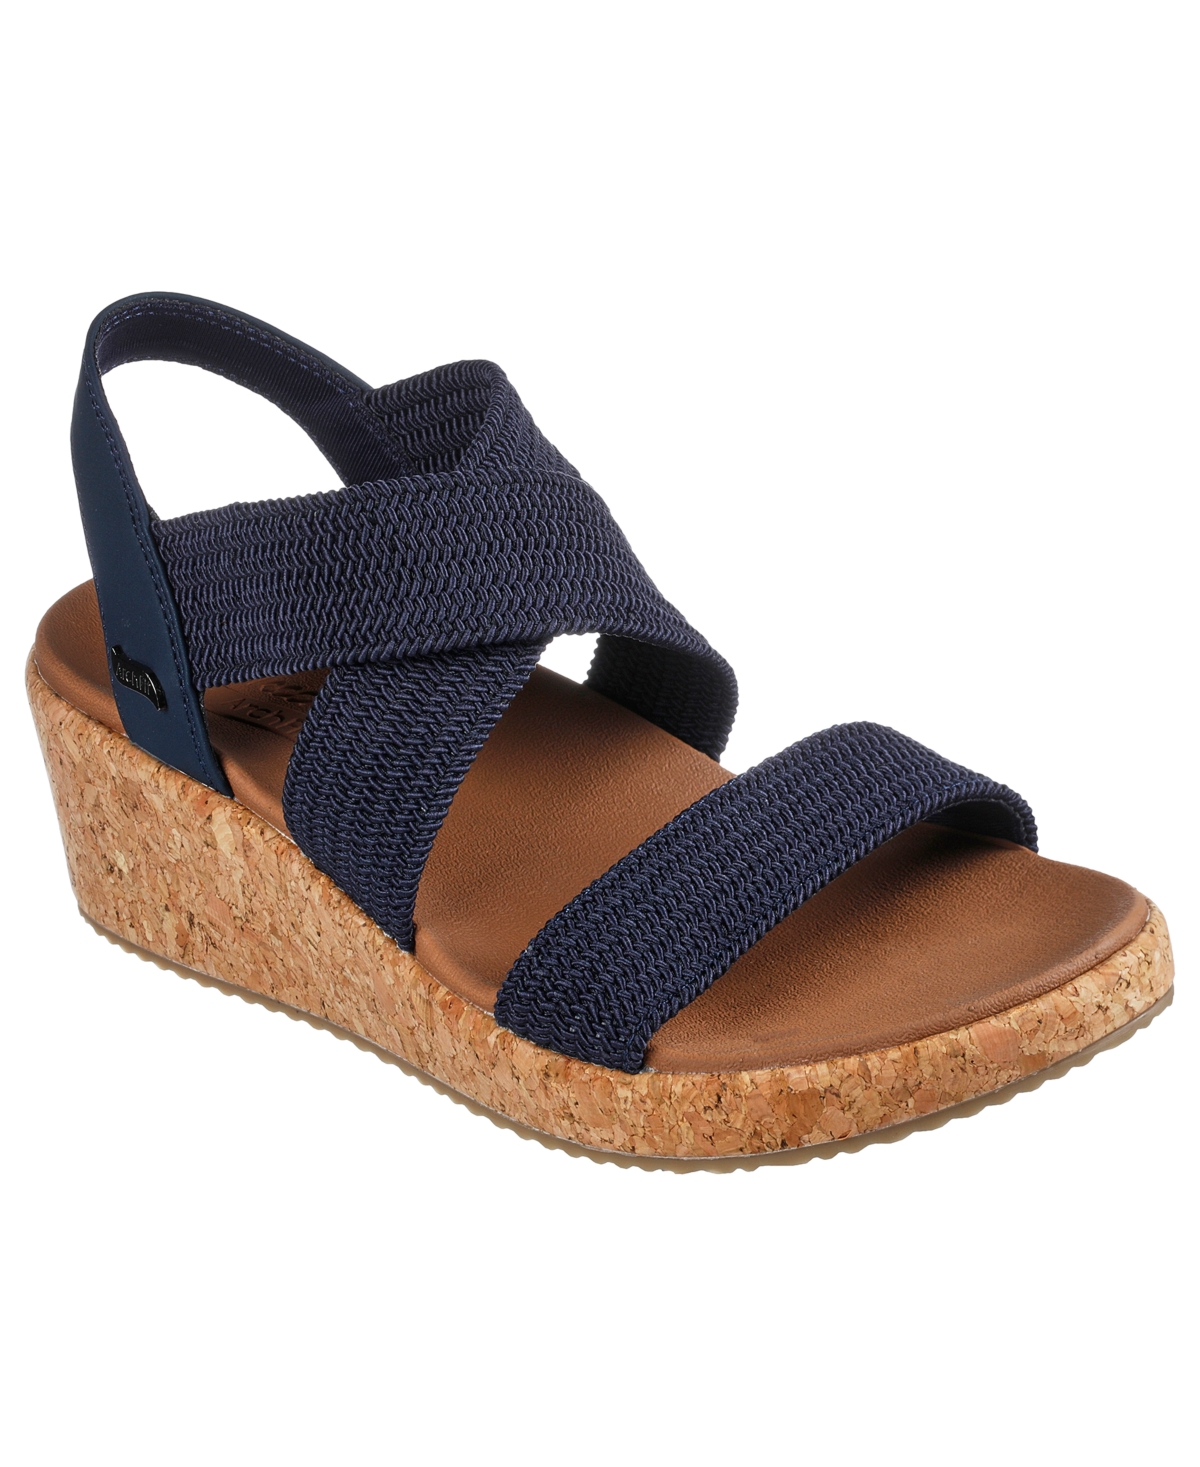 Women's Beverlee - Love Stays Wedge Sandals from Finish Line - Nvy-navy